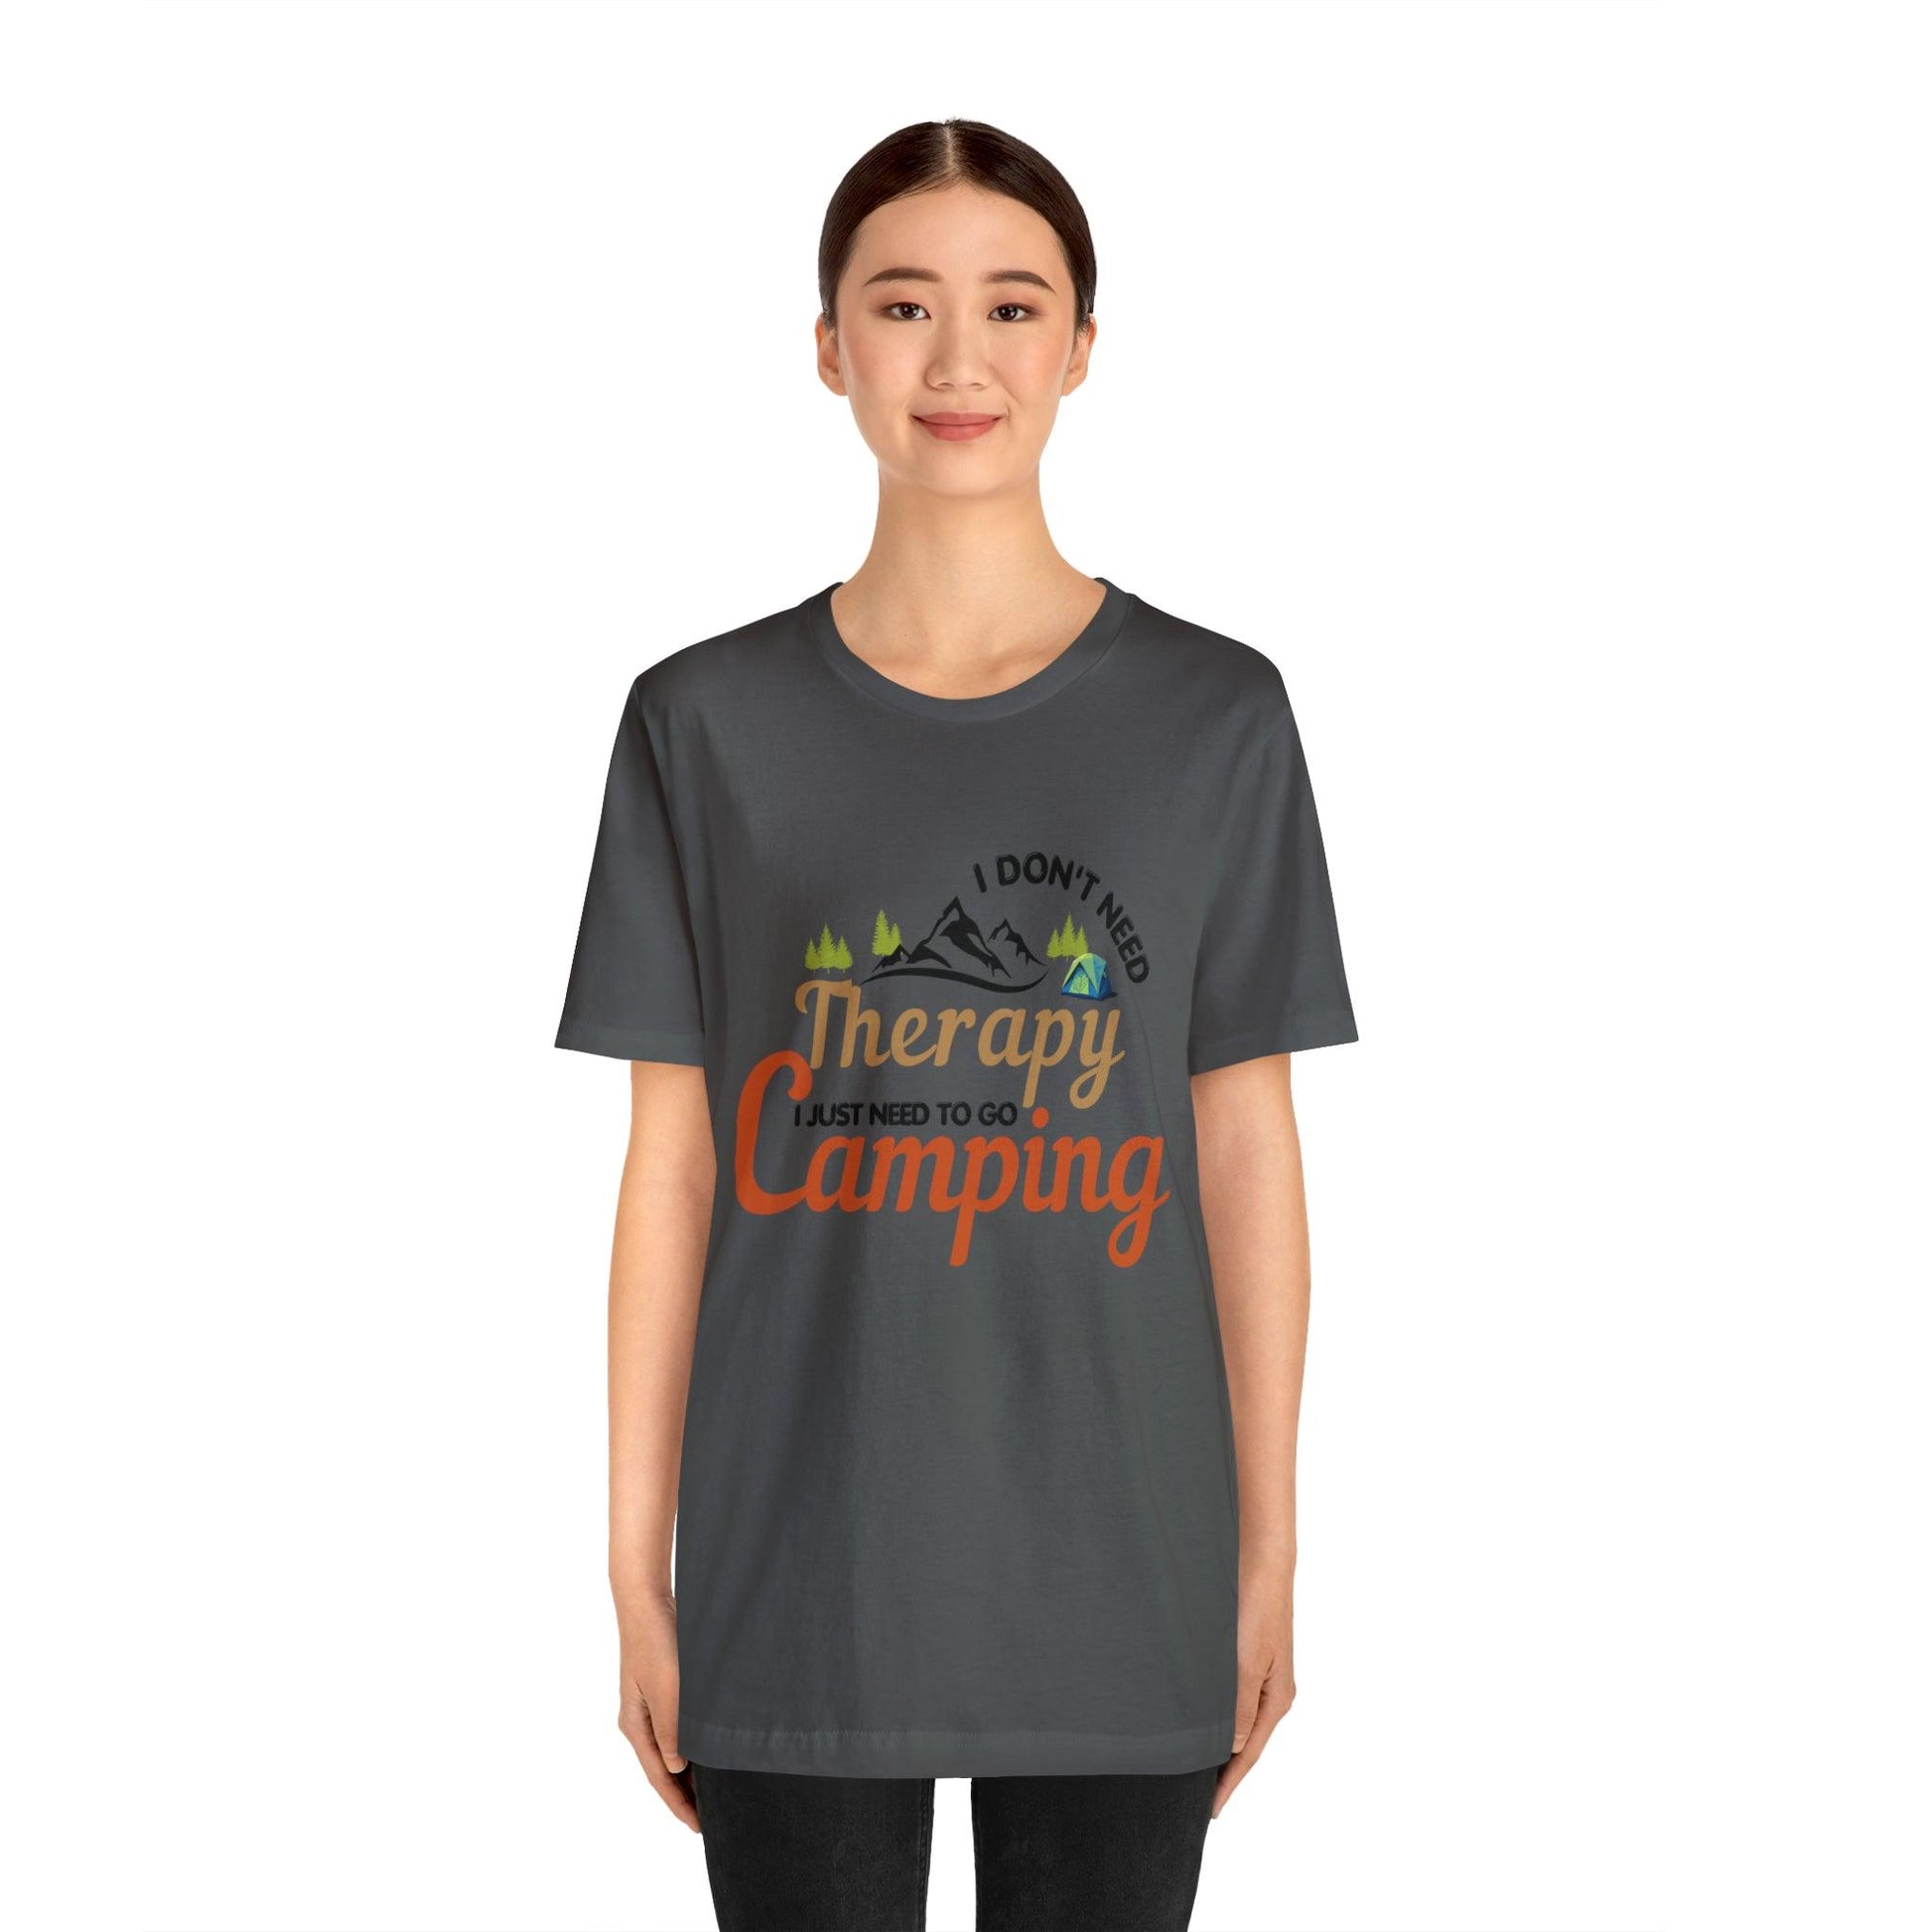 I don't need therapy I just need to go camping, camping shirt, dad shirt, dad gift, gift for outdoor lover, fishing gift nature lover shirt - Giftsmojo